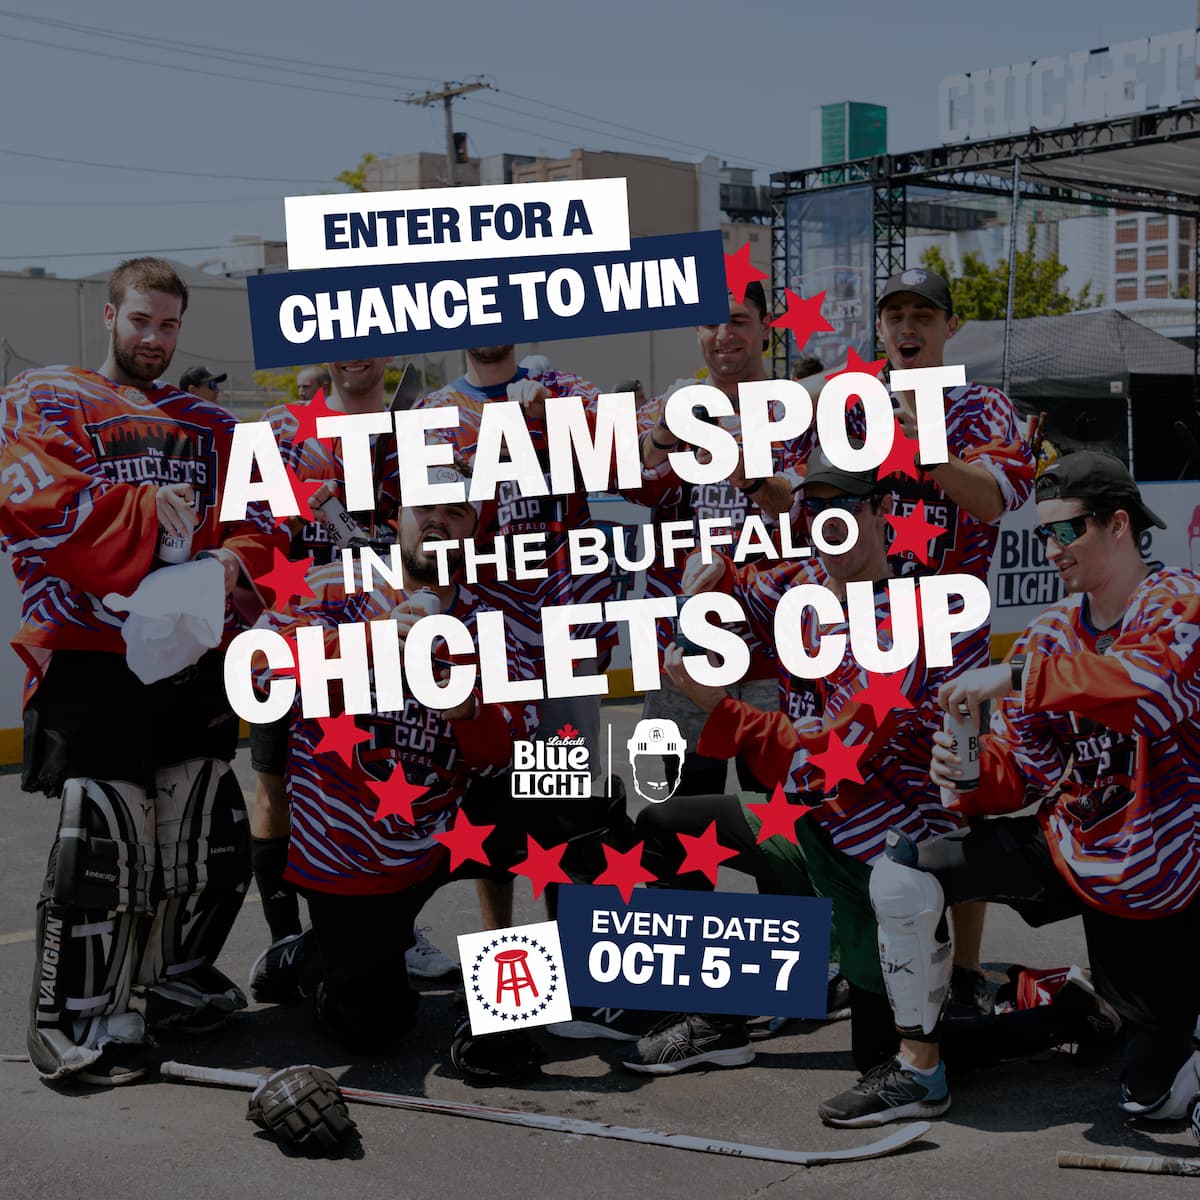 A hockey team posing at the Chiclets Cup with an overlayed graphic that reads: 'Enter for a chance to win A Team spot in the Buffalo Chiclets Cup Oct. 5-7'